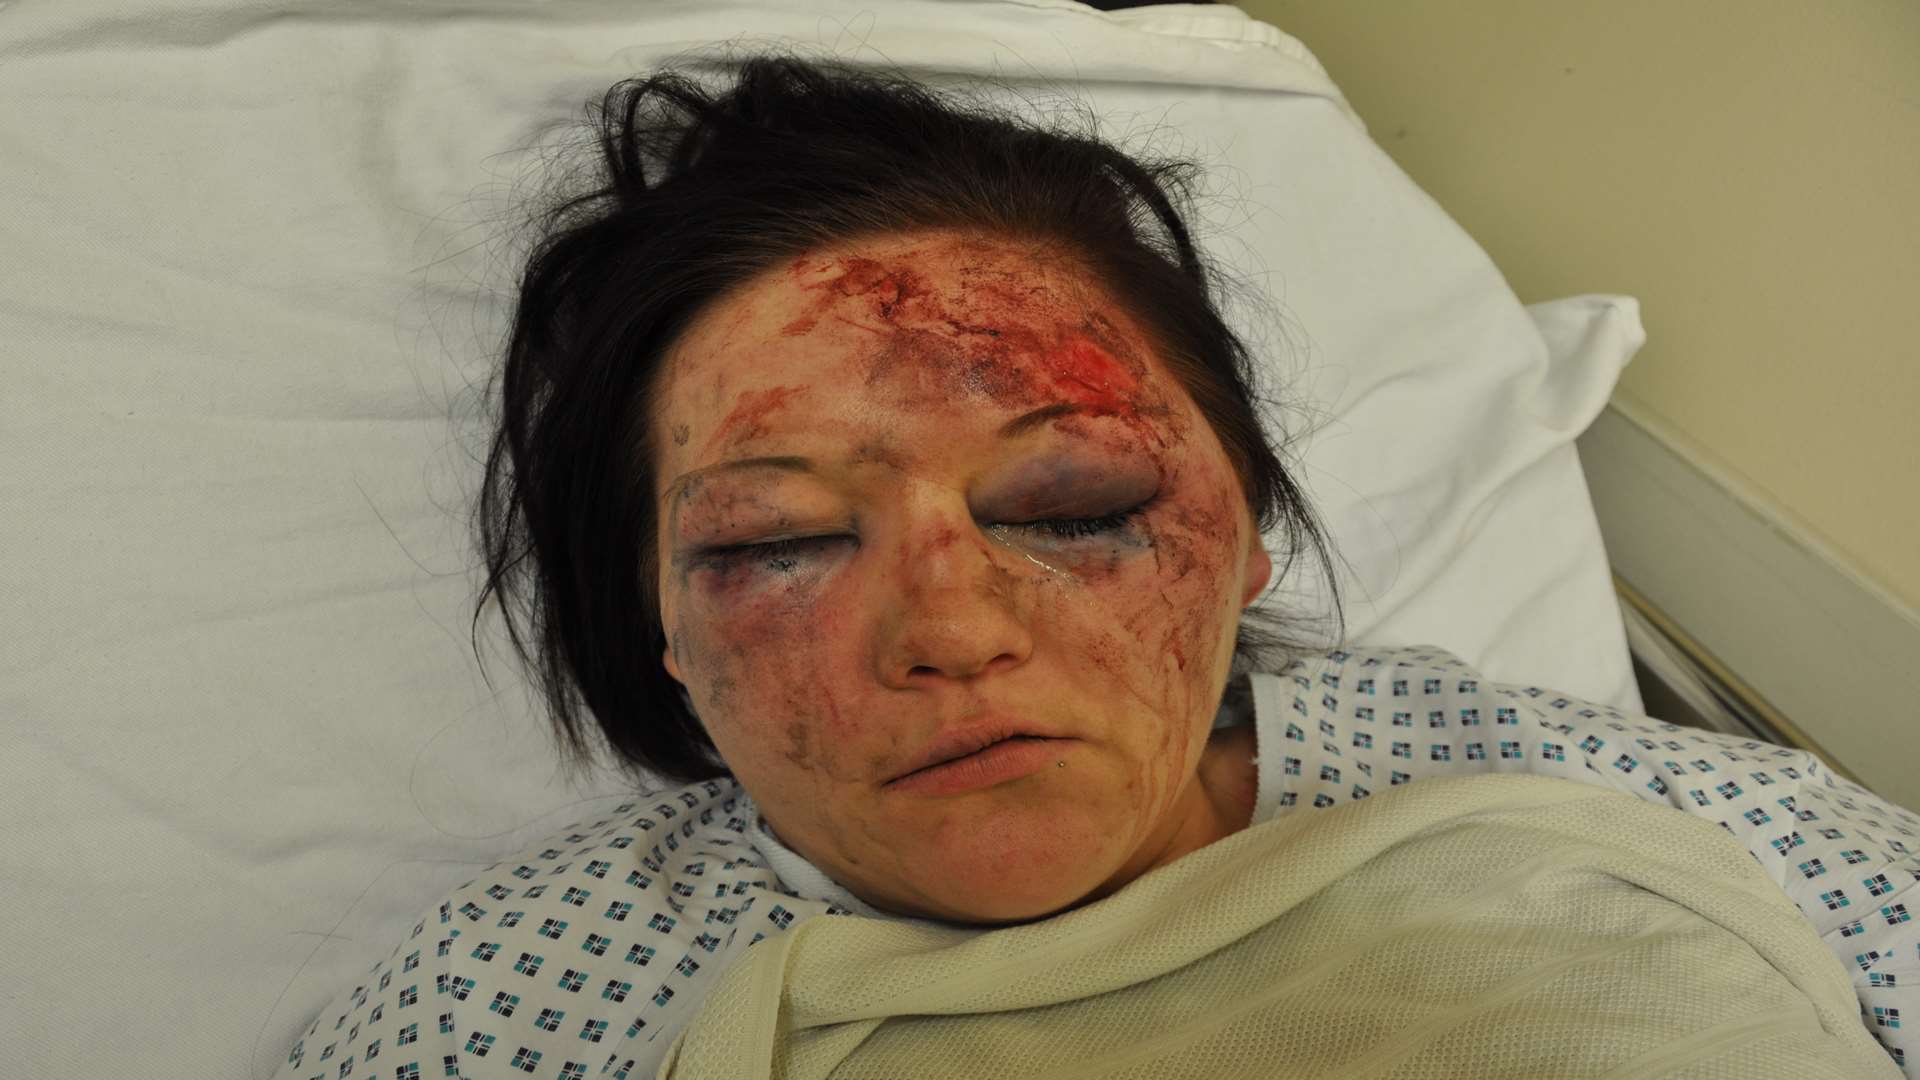 Litisha Henry was left with horrific injuries